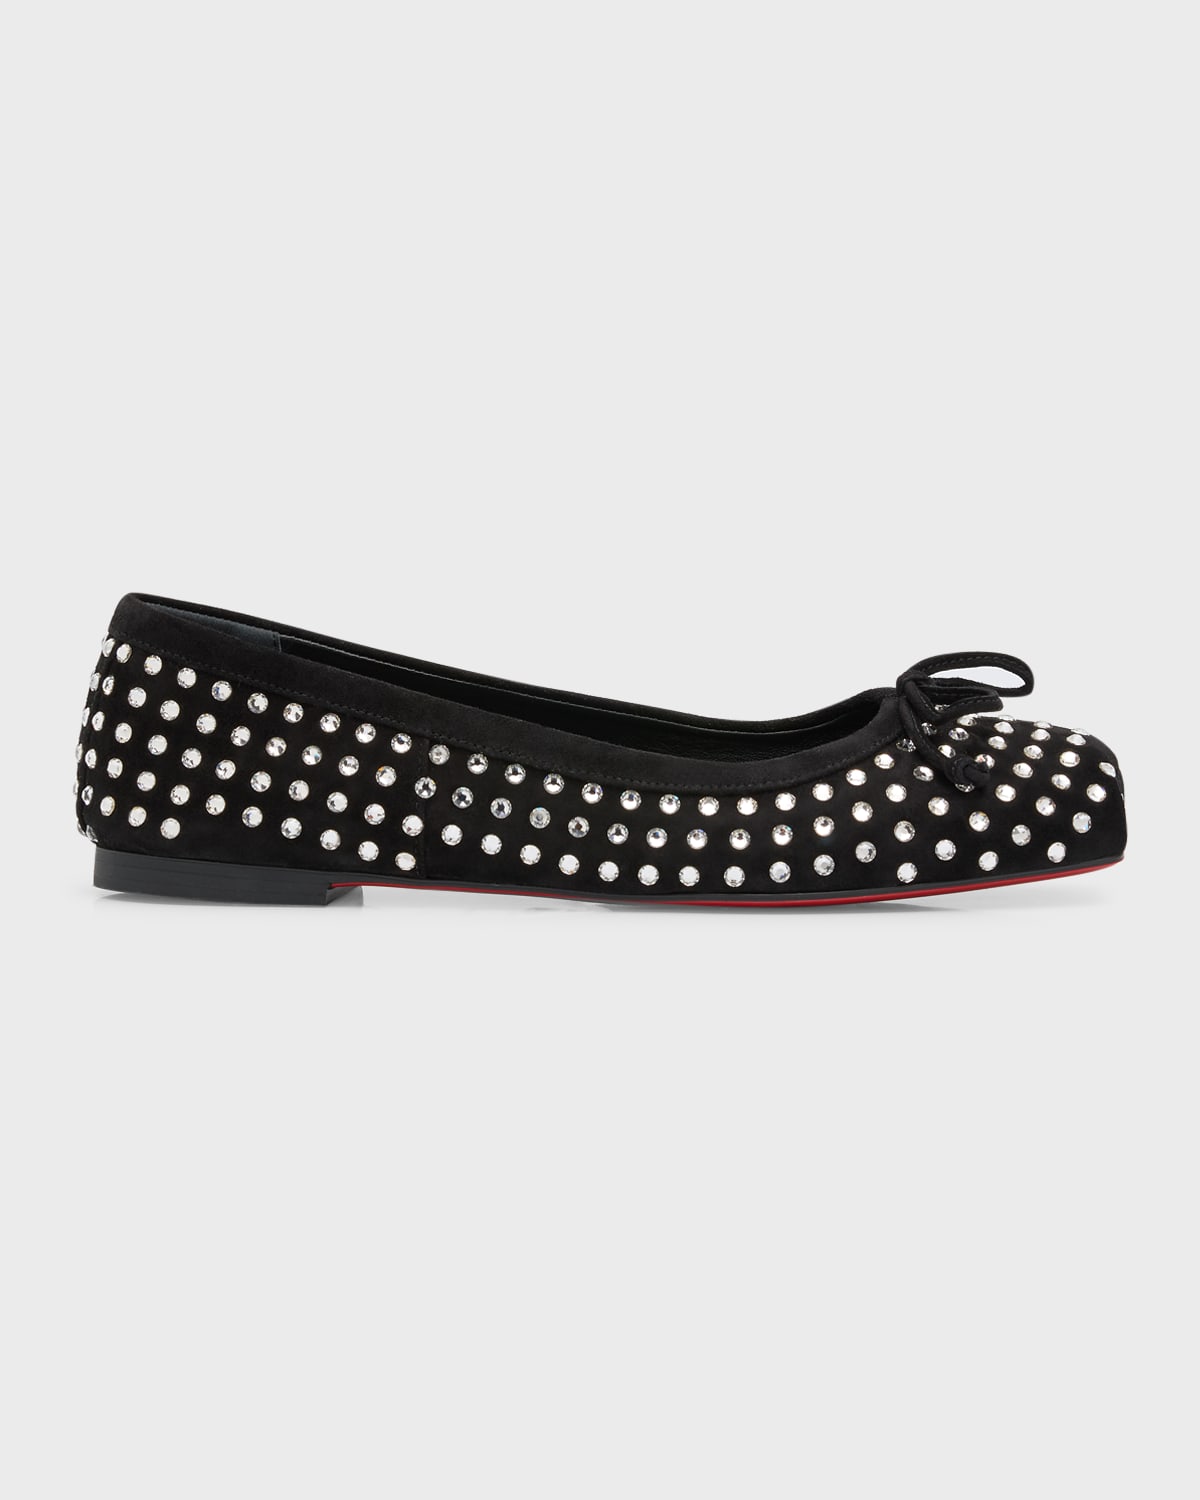 Mamadrague Strass Bow Red Sole Ballerina Flats